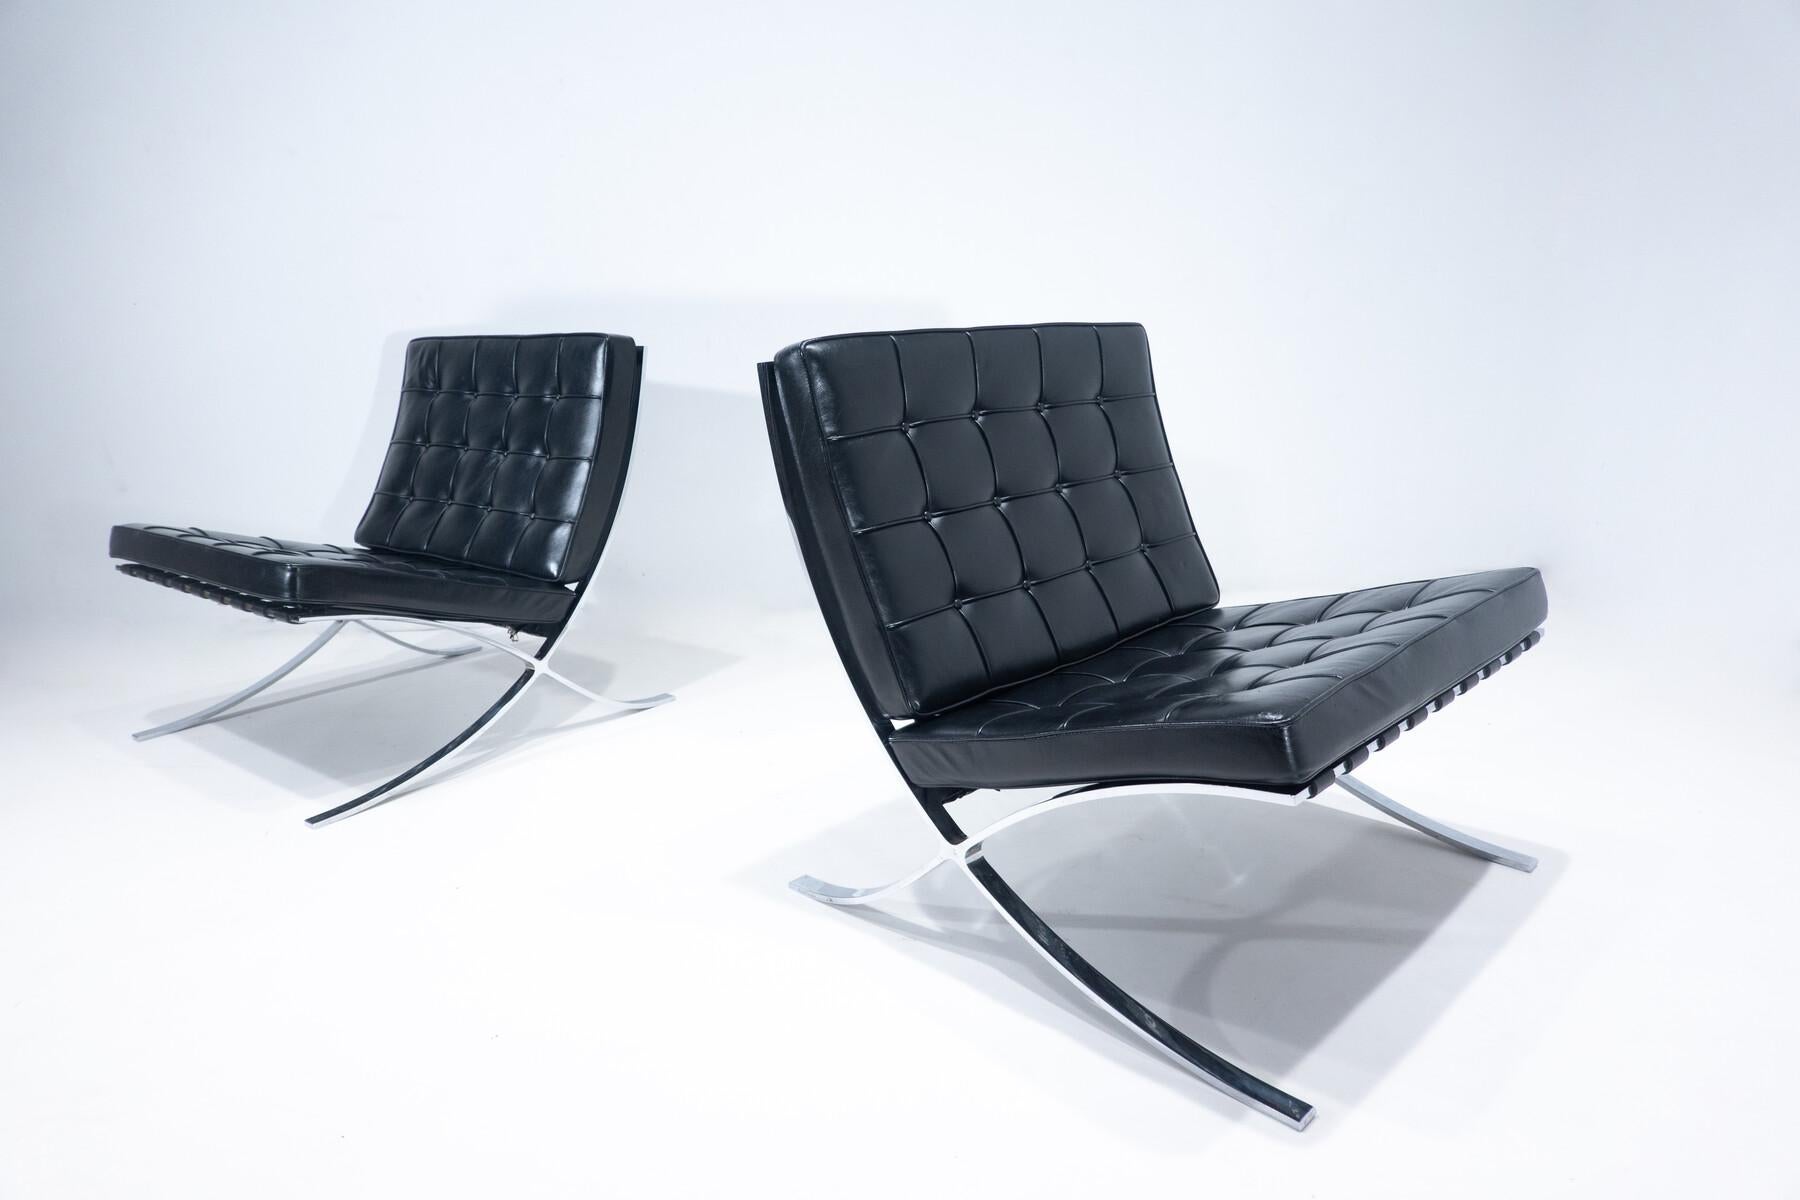 Pair of Black Leather Barcelona Chairs by Mies Van Der Rohe for Knoll, 1960s For Sale 4